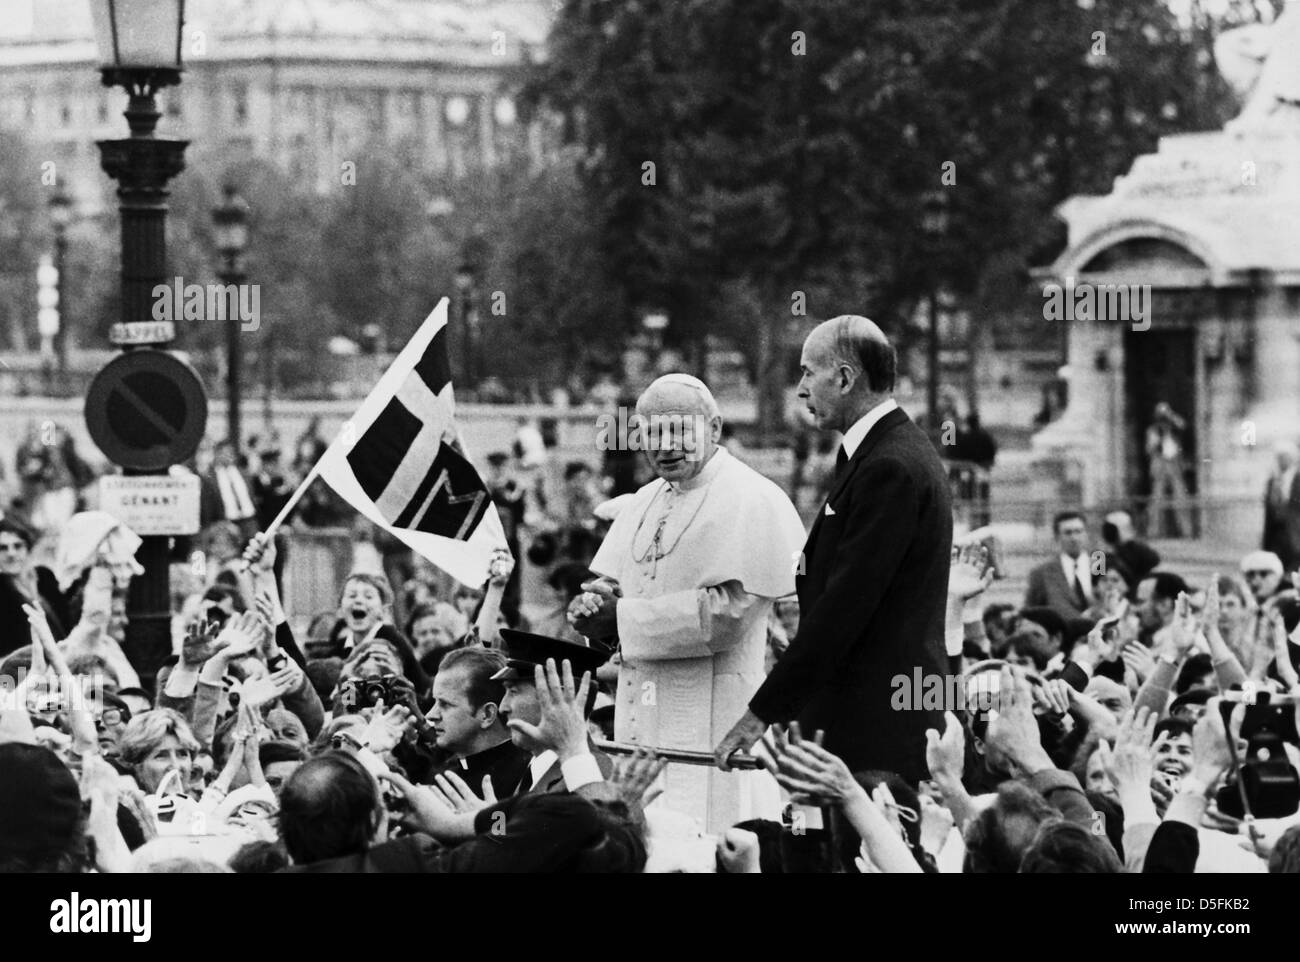 Pope John Paul II And The French President , Valery Giscard D'Estaing,Place De La Concorde, Paris, France,1980 Stock Photo